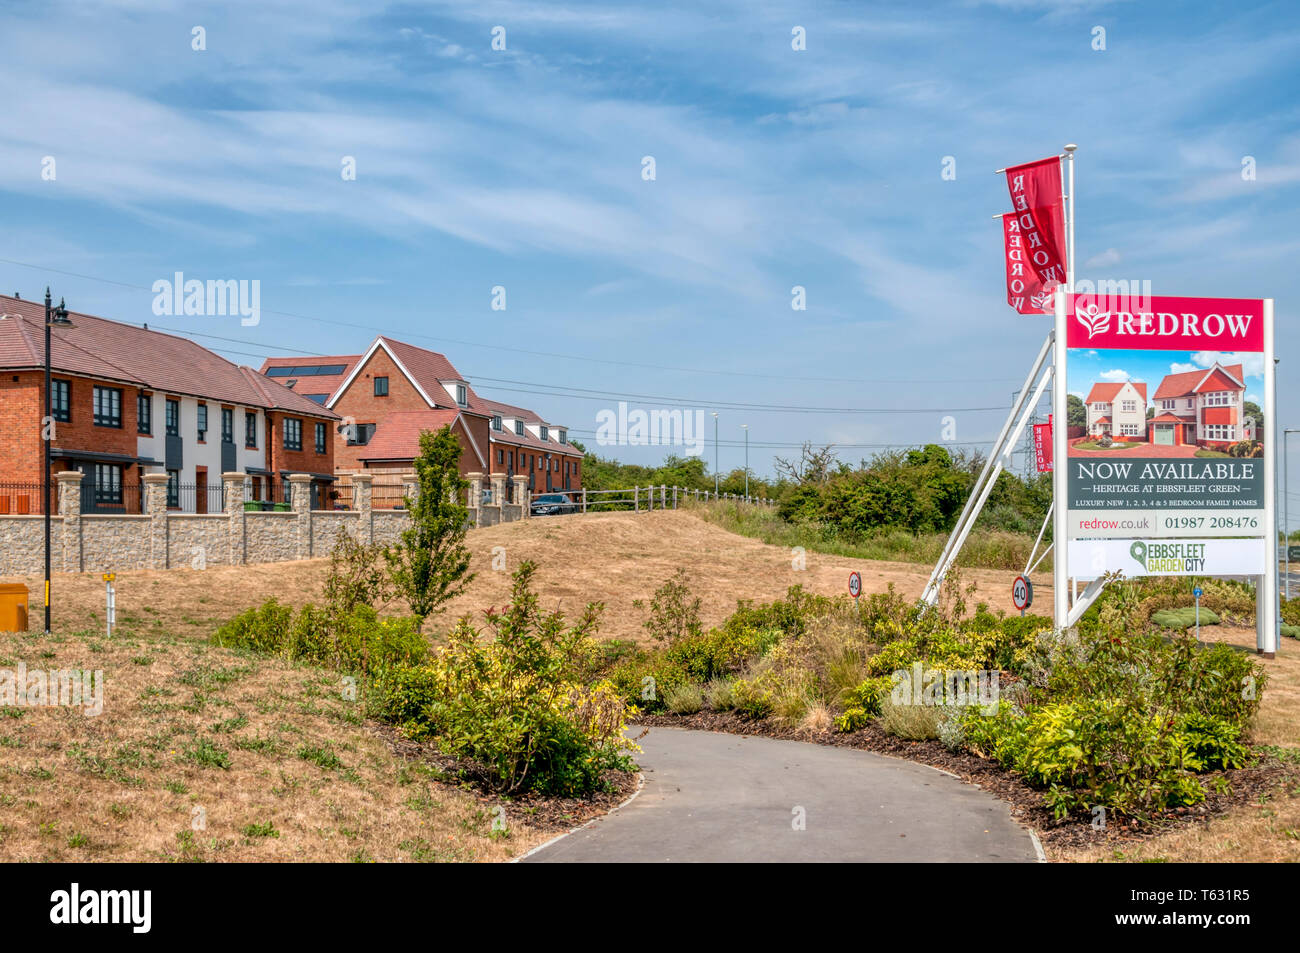 A sign advertises Heritage Homes by Redrow at Ebbsfleet Green, part of Ebbsfleet Garden City in Kent. Stock Photo